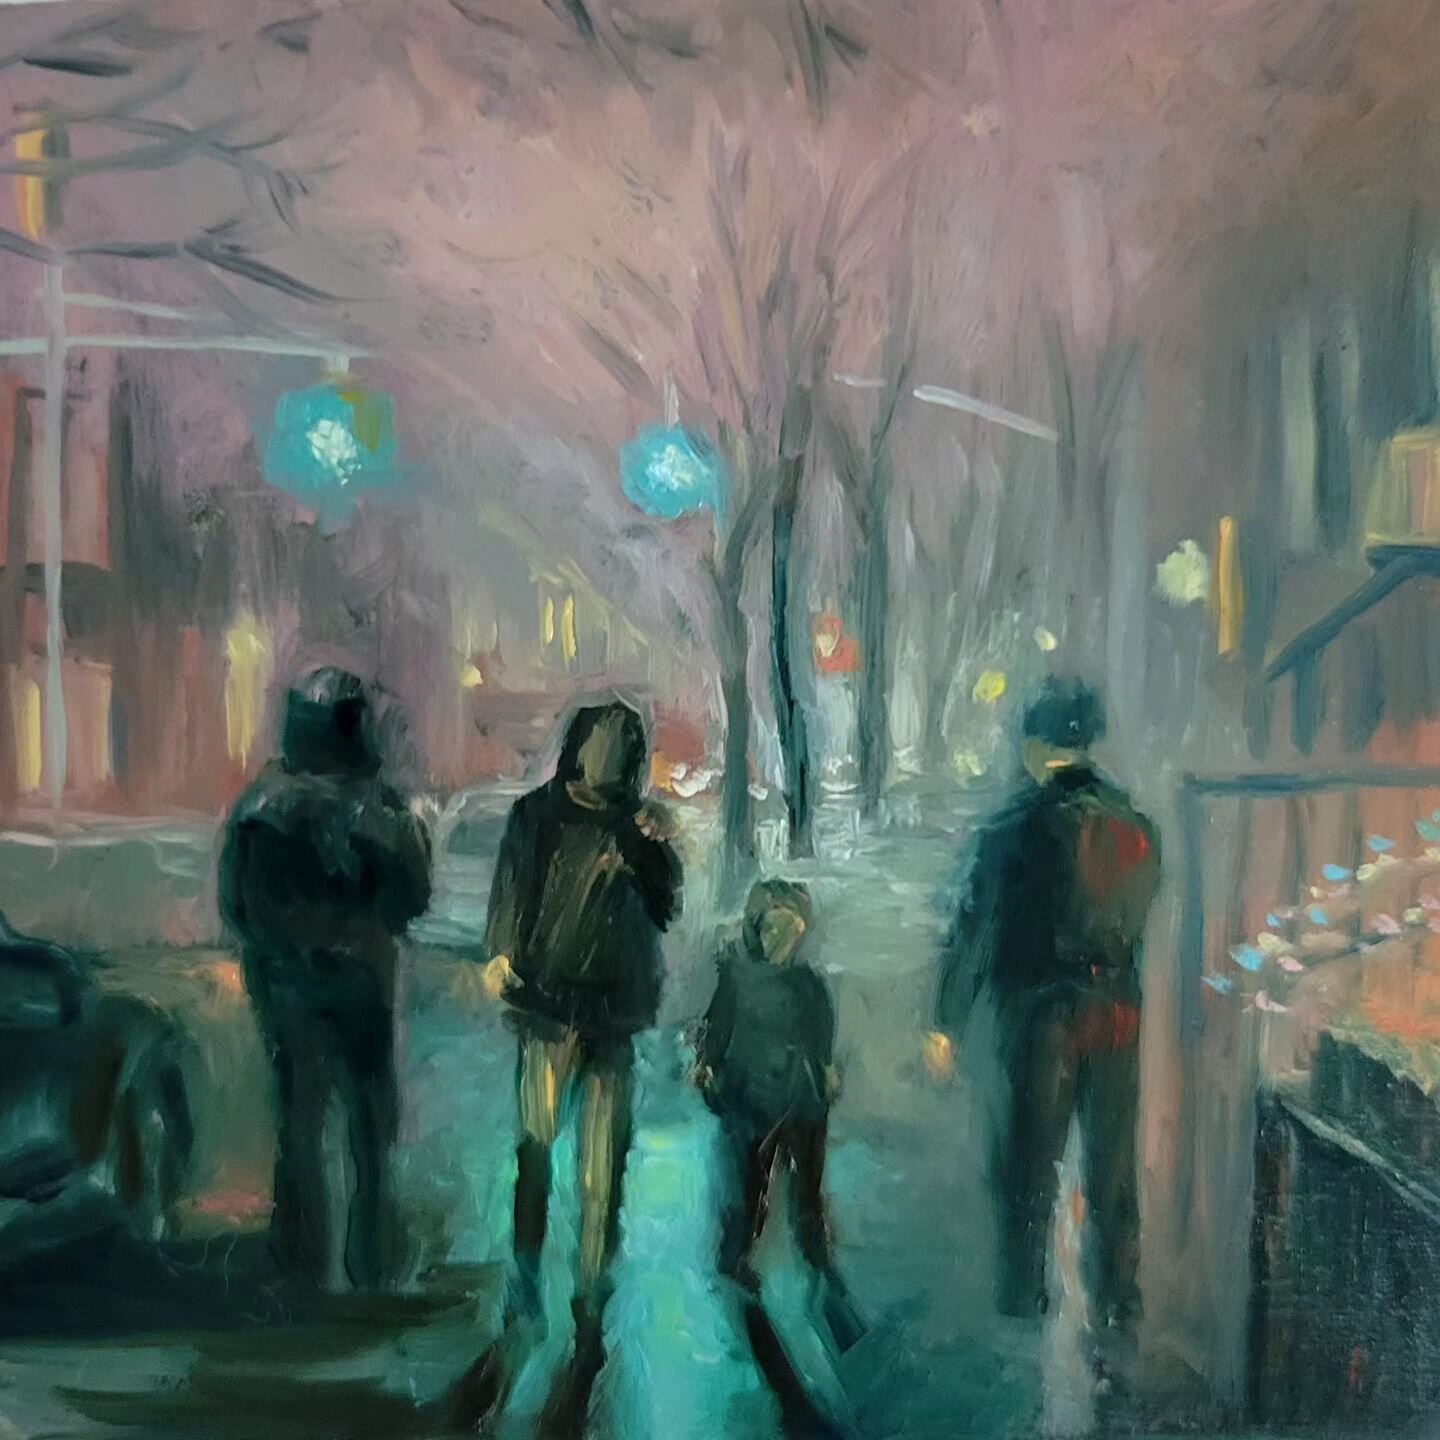 Been distracted with too many life chores, having trouble focusing, no time to paint. Finally settled down long enough to make a mini night painting. Pure therapy, feeling so much calmer now. &quot;New Years Eve, Park Slope&quot; mini square. 4x4 inc